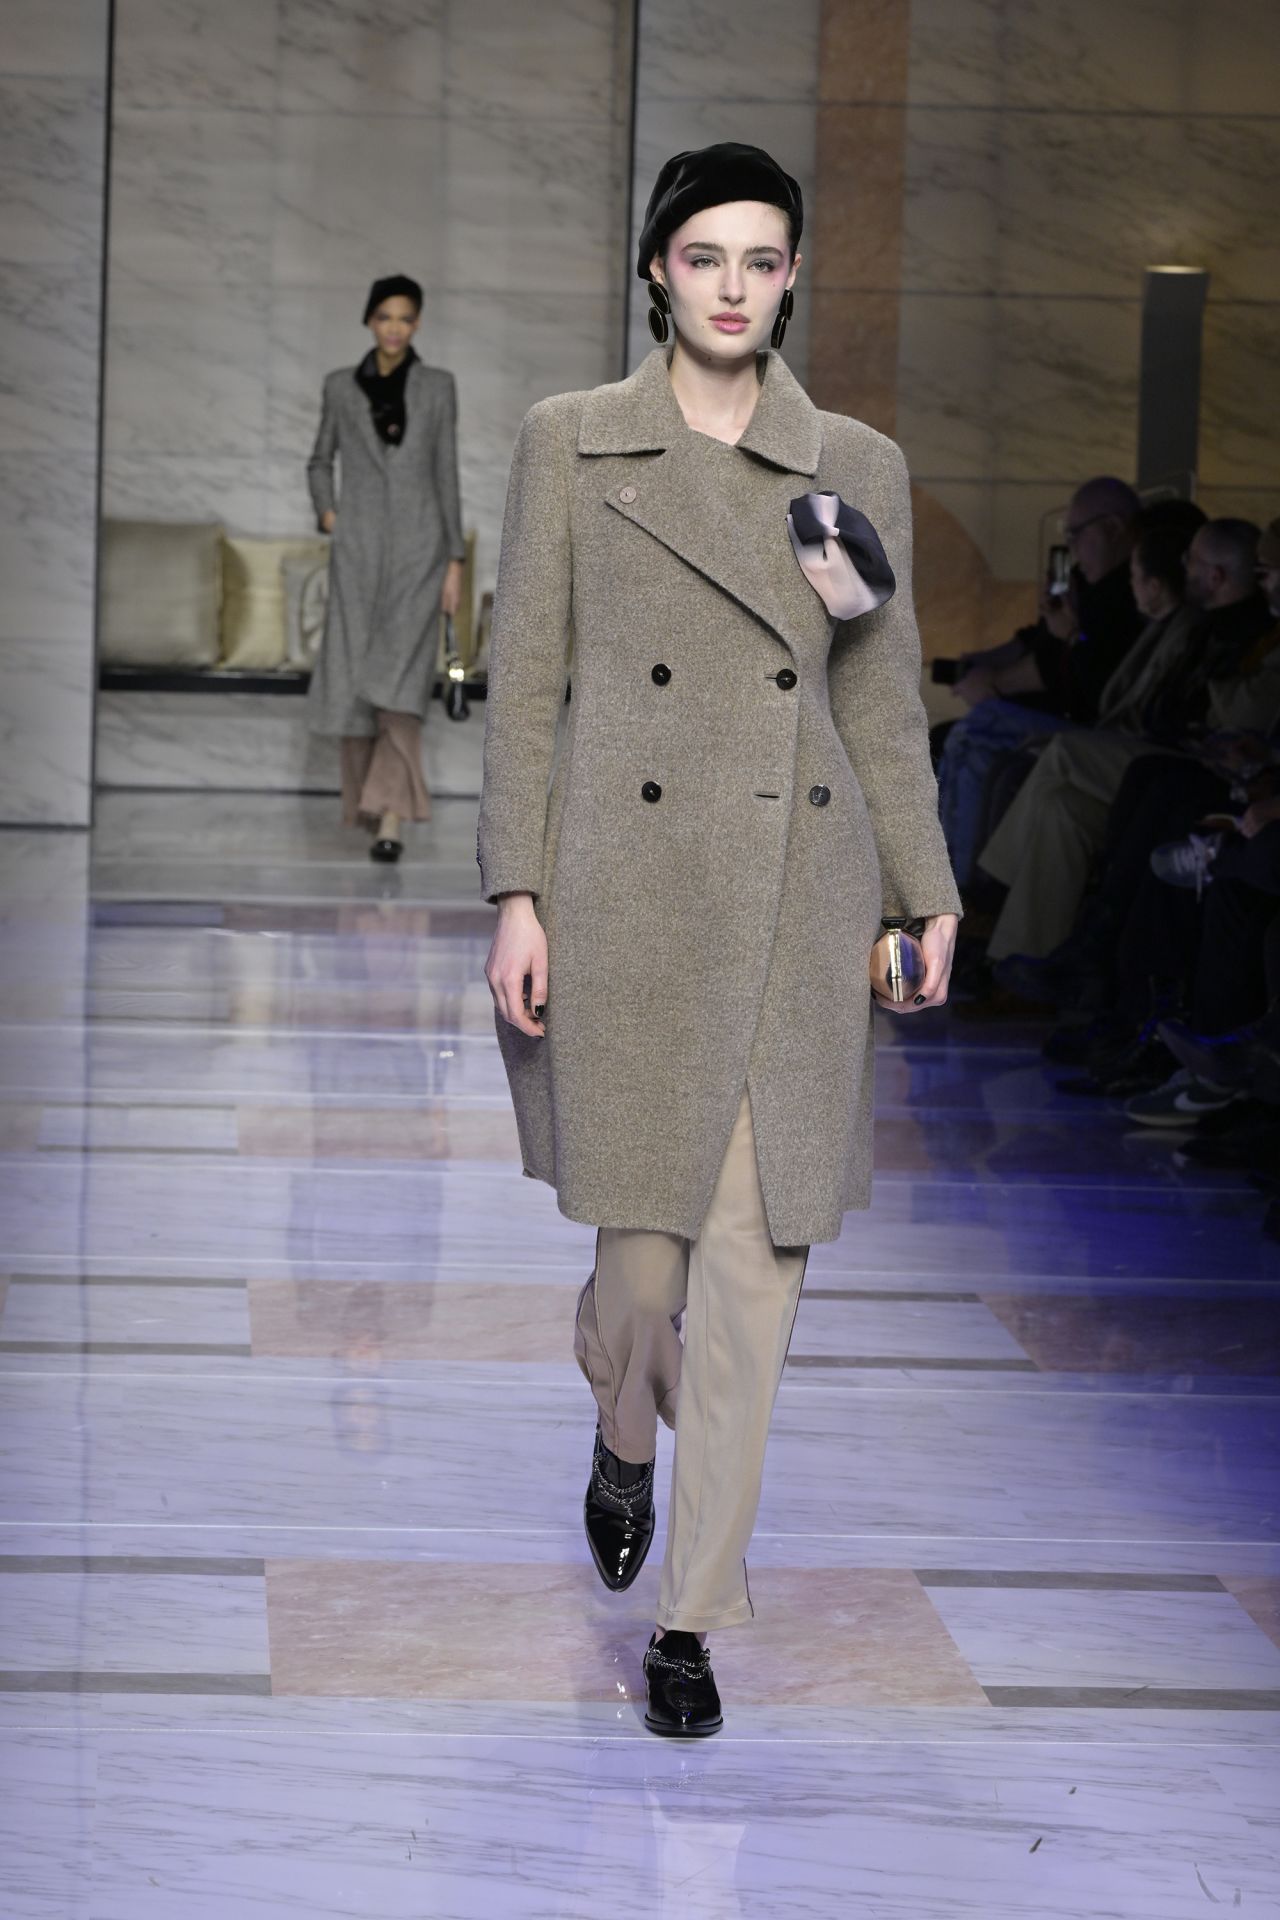 And again gray coasts appeared at Giorgio Armani, who was one of the designers adopting a more a wearable approach to Fall-Winter 2023.